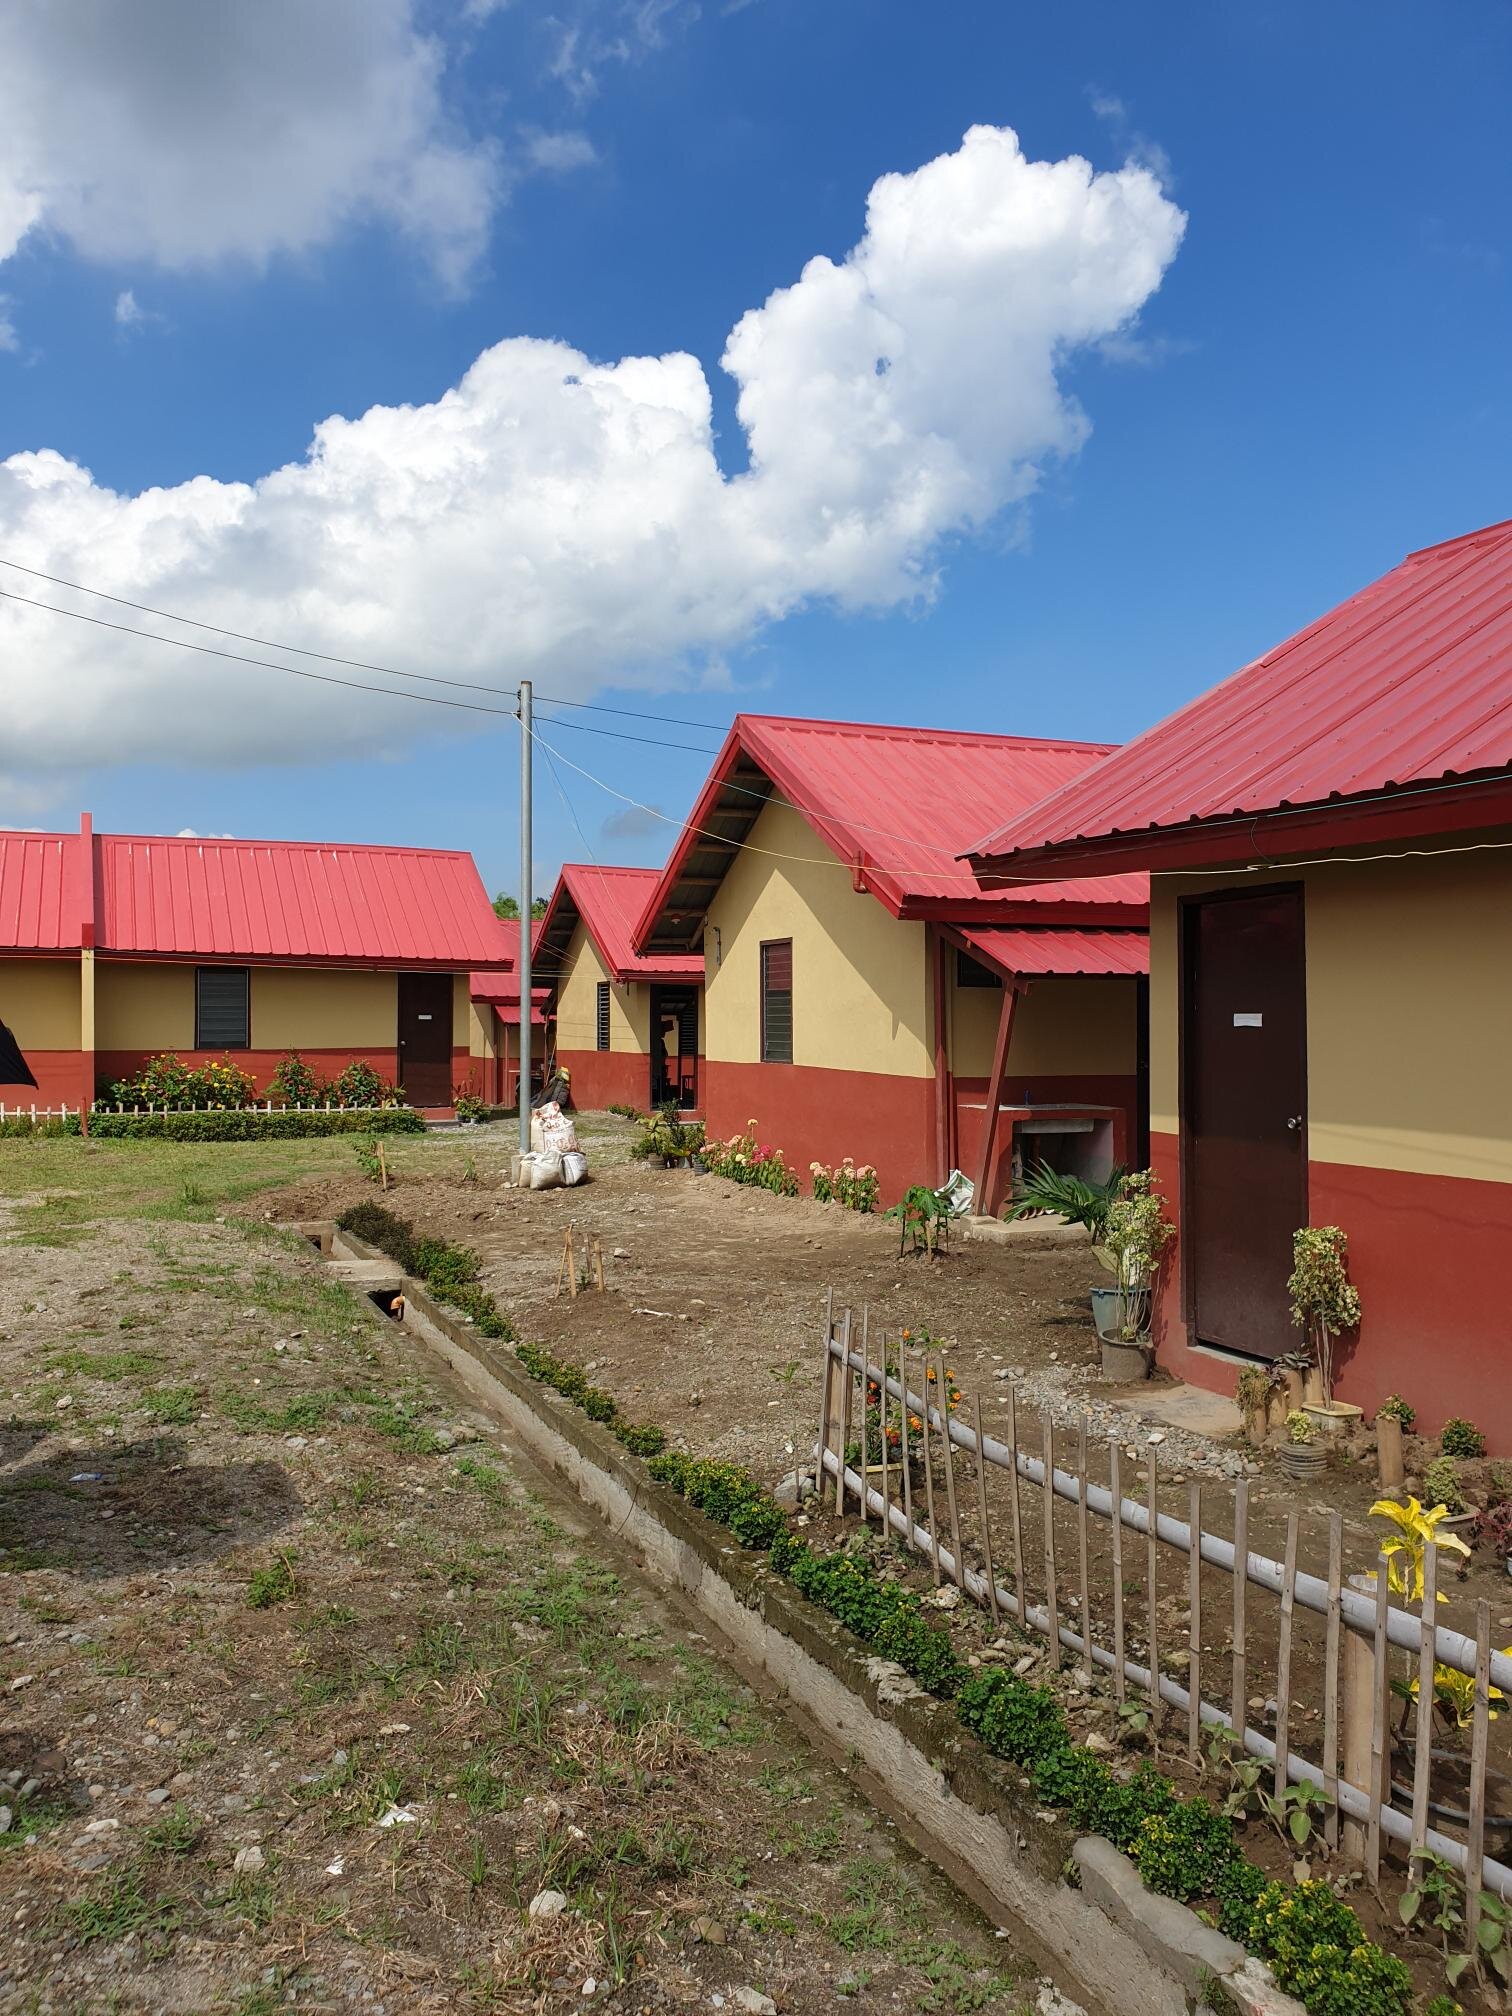 Sustainable Social Housing in The Philippines - Hilti Foundation - Cement Bamboo Frame Technology